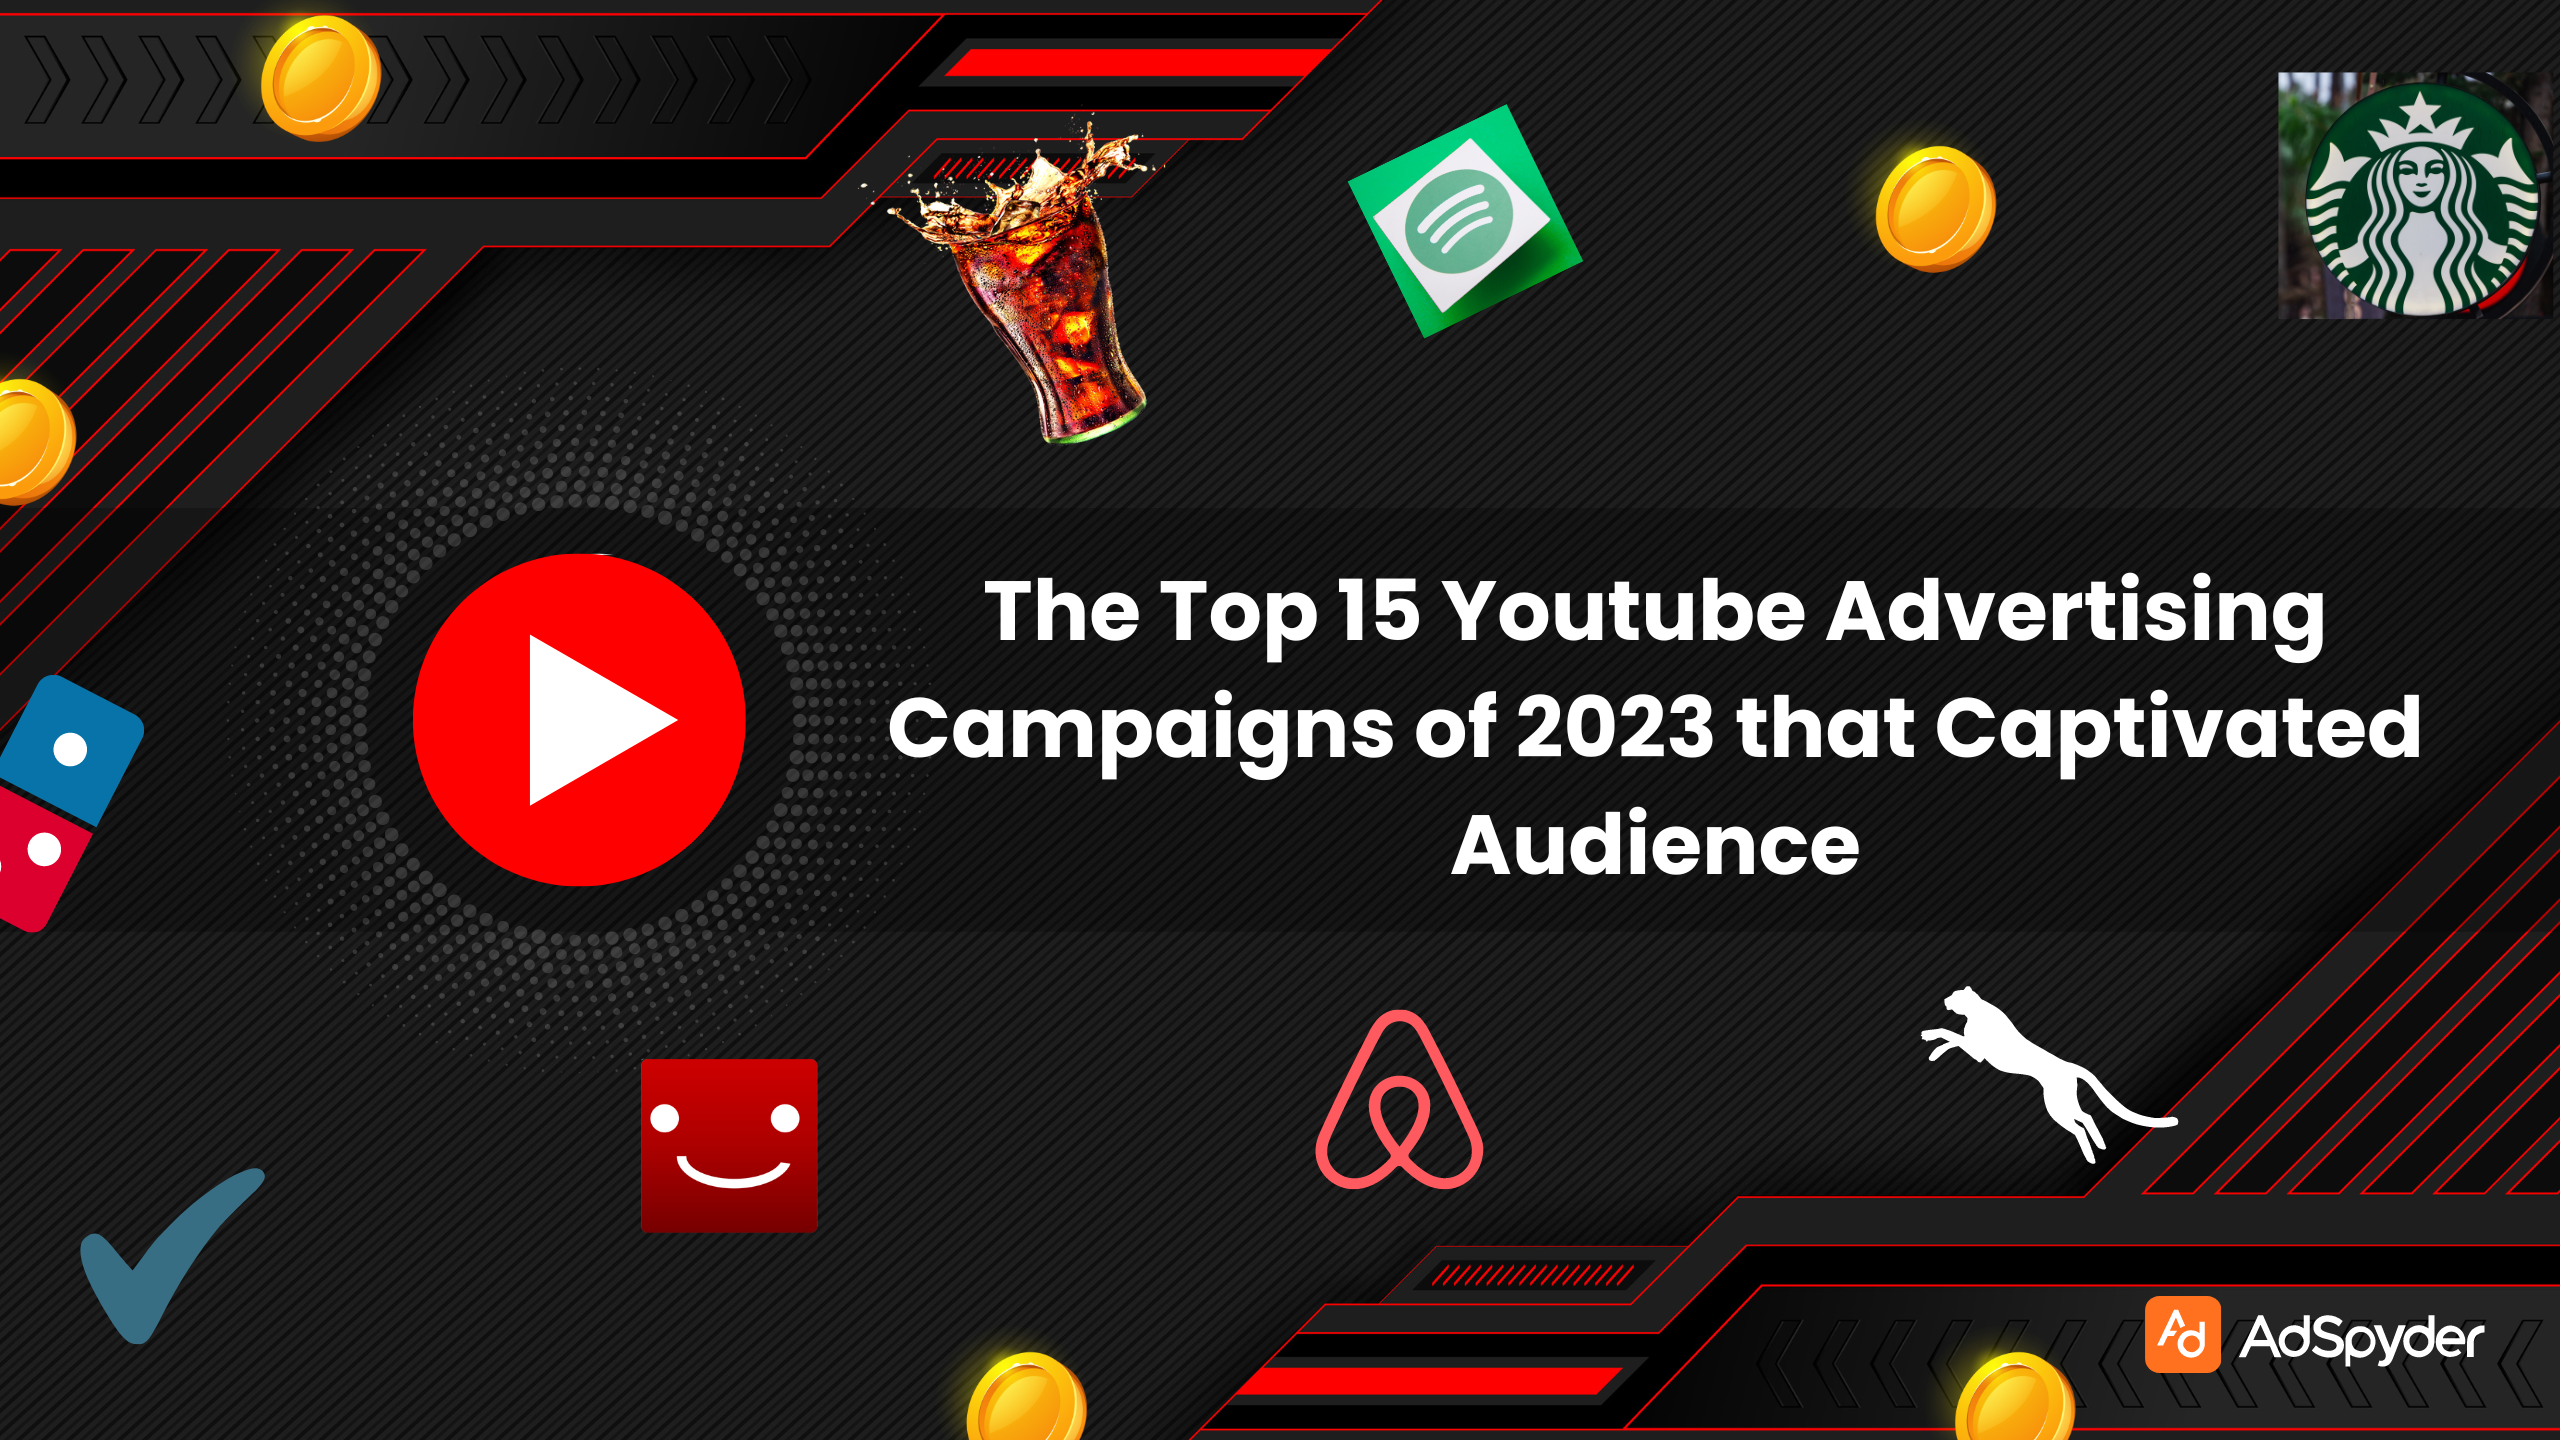 Top 15 Youtube Advertising Campaigns of 2023 that Captivated Audience